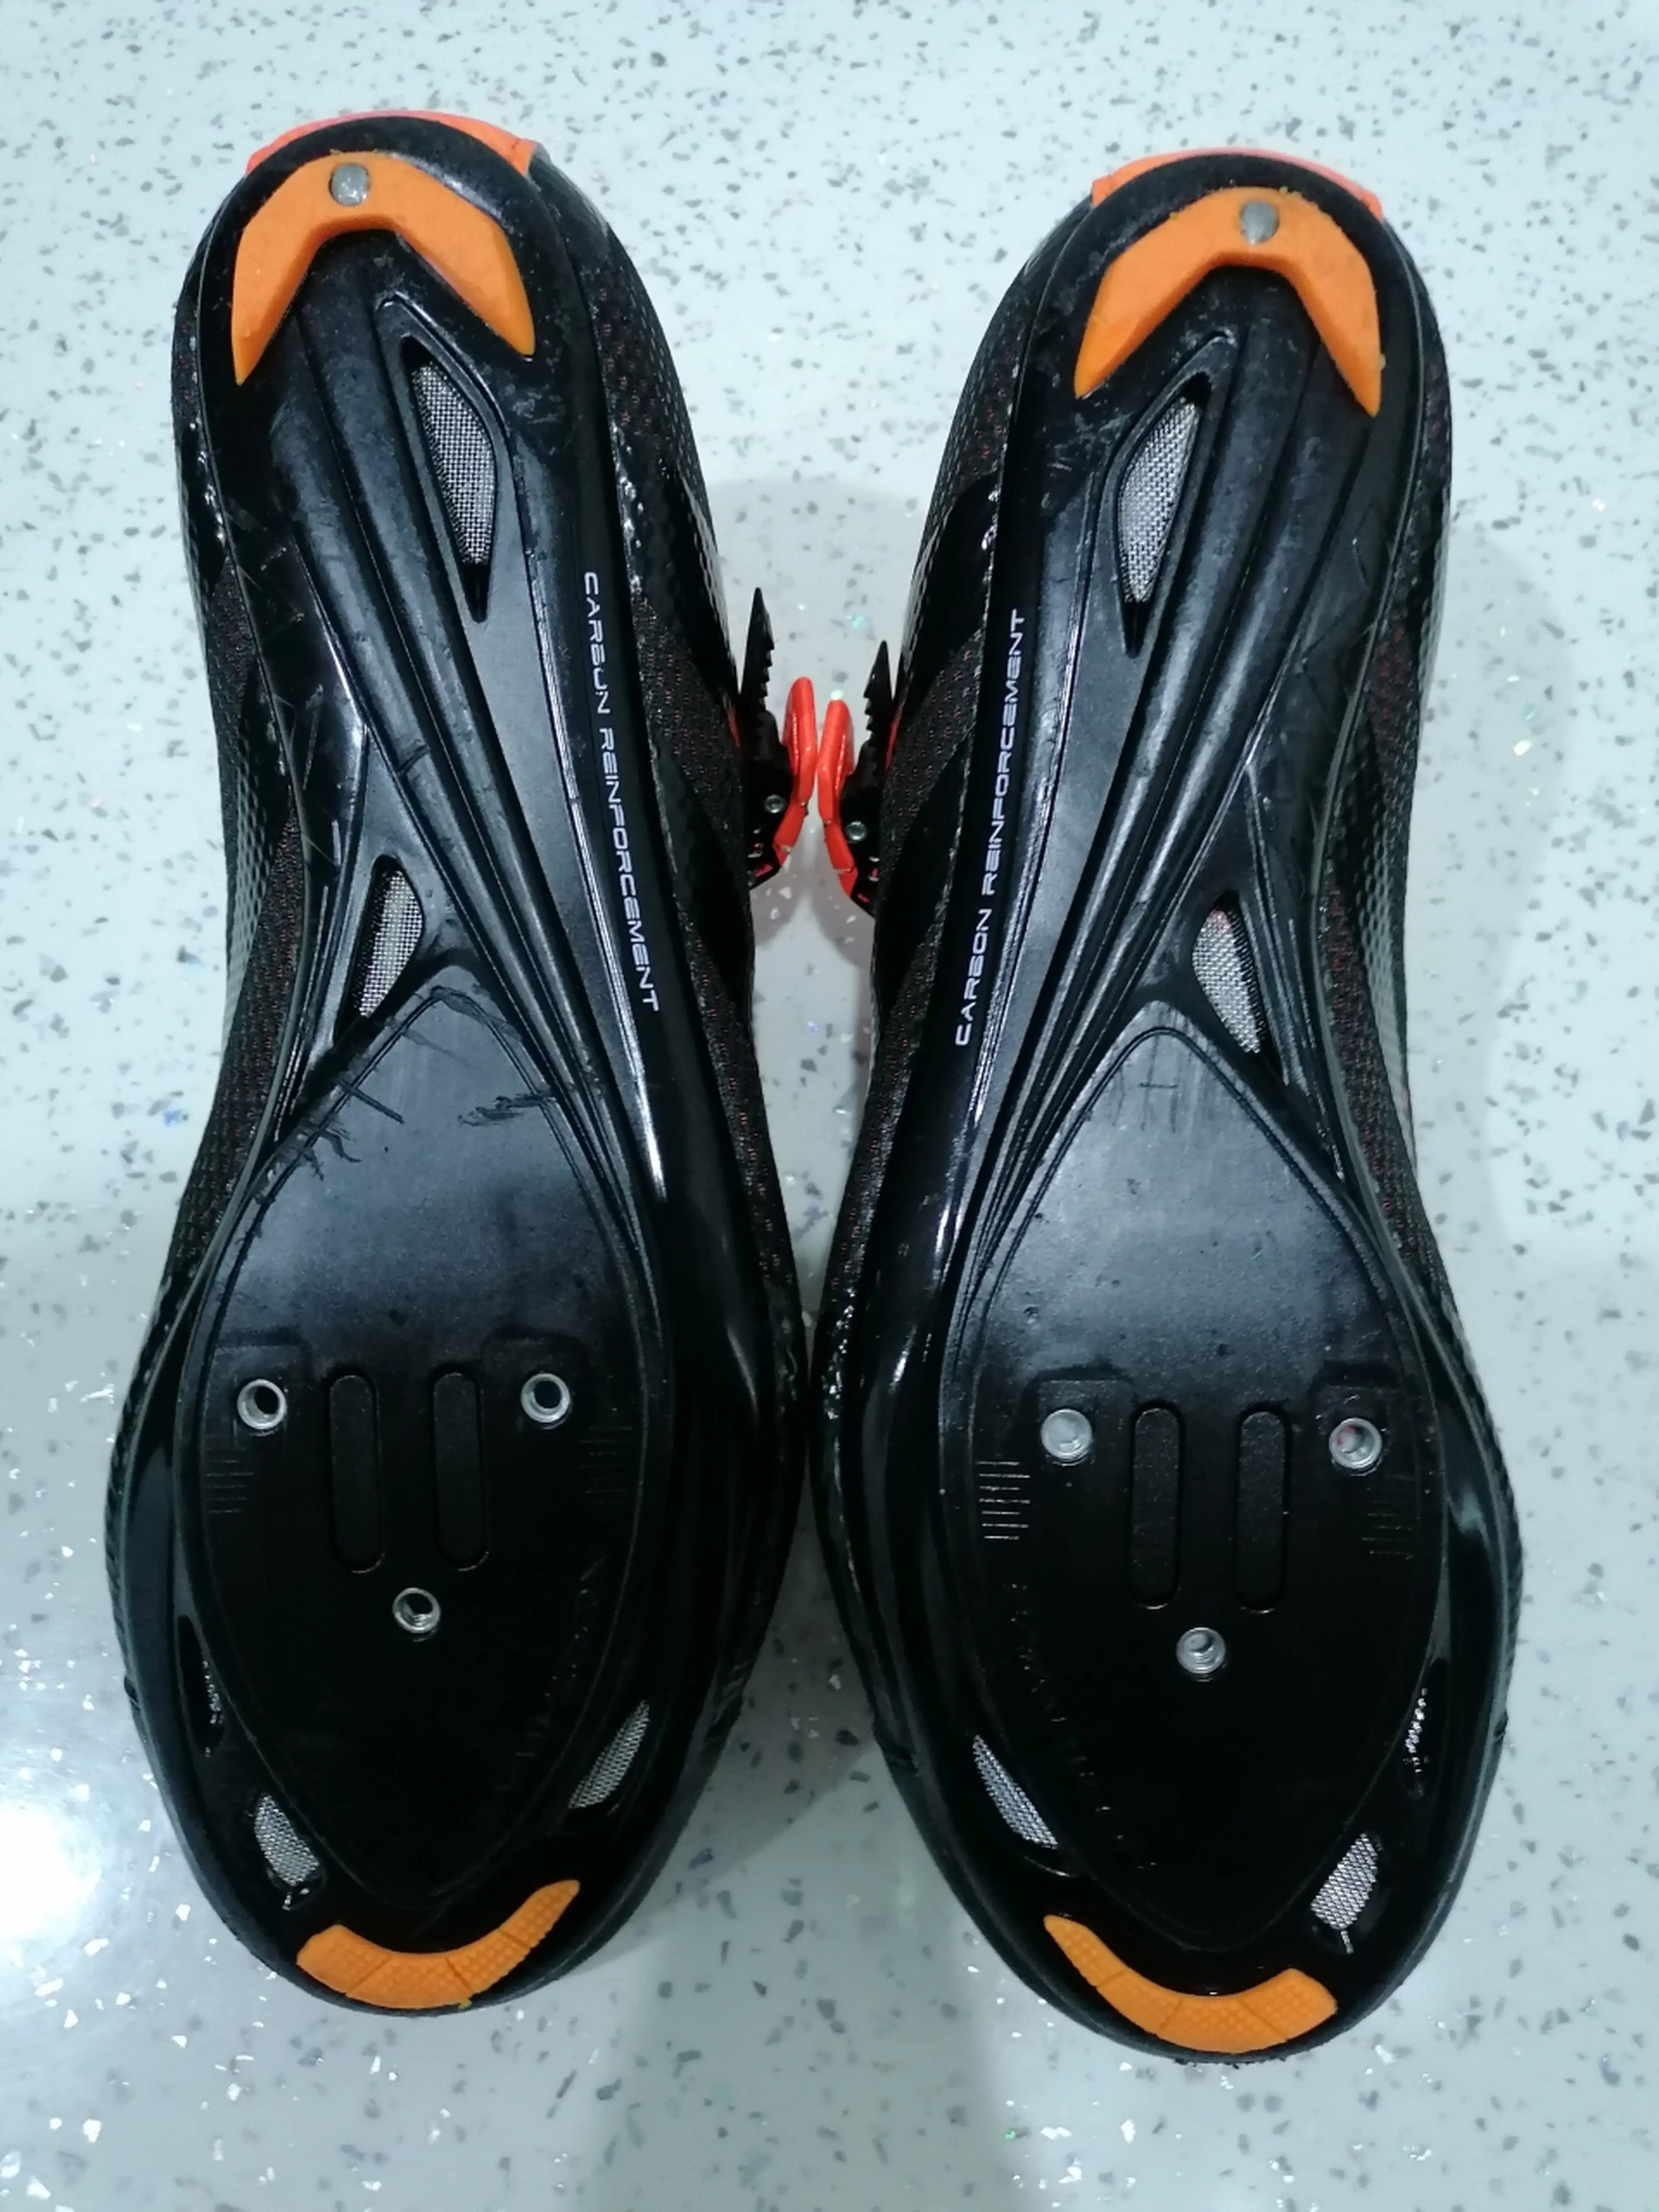 4. Northwave Sonic Srs 2 road size 43